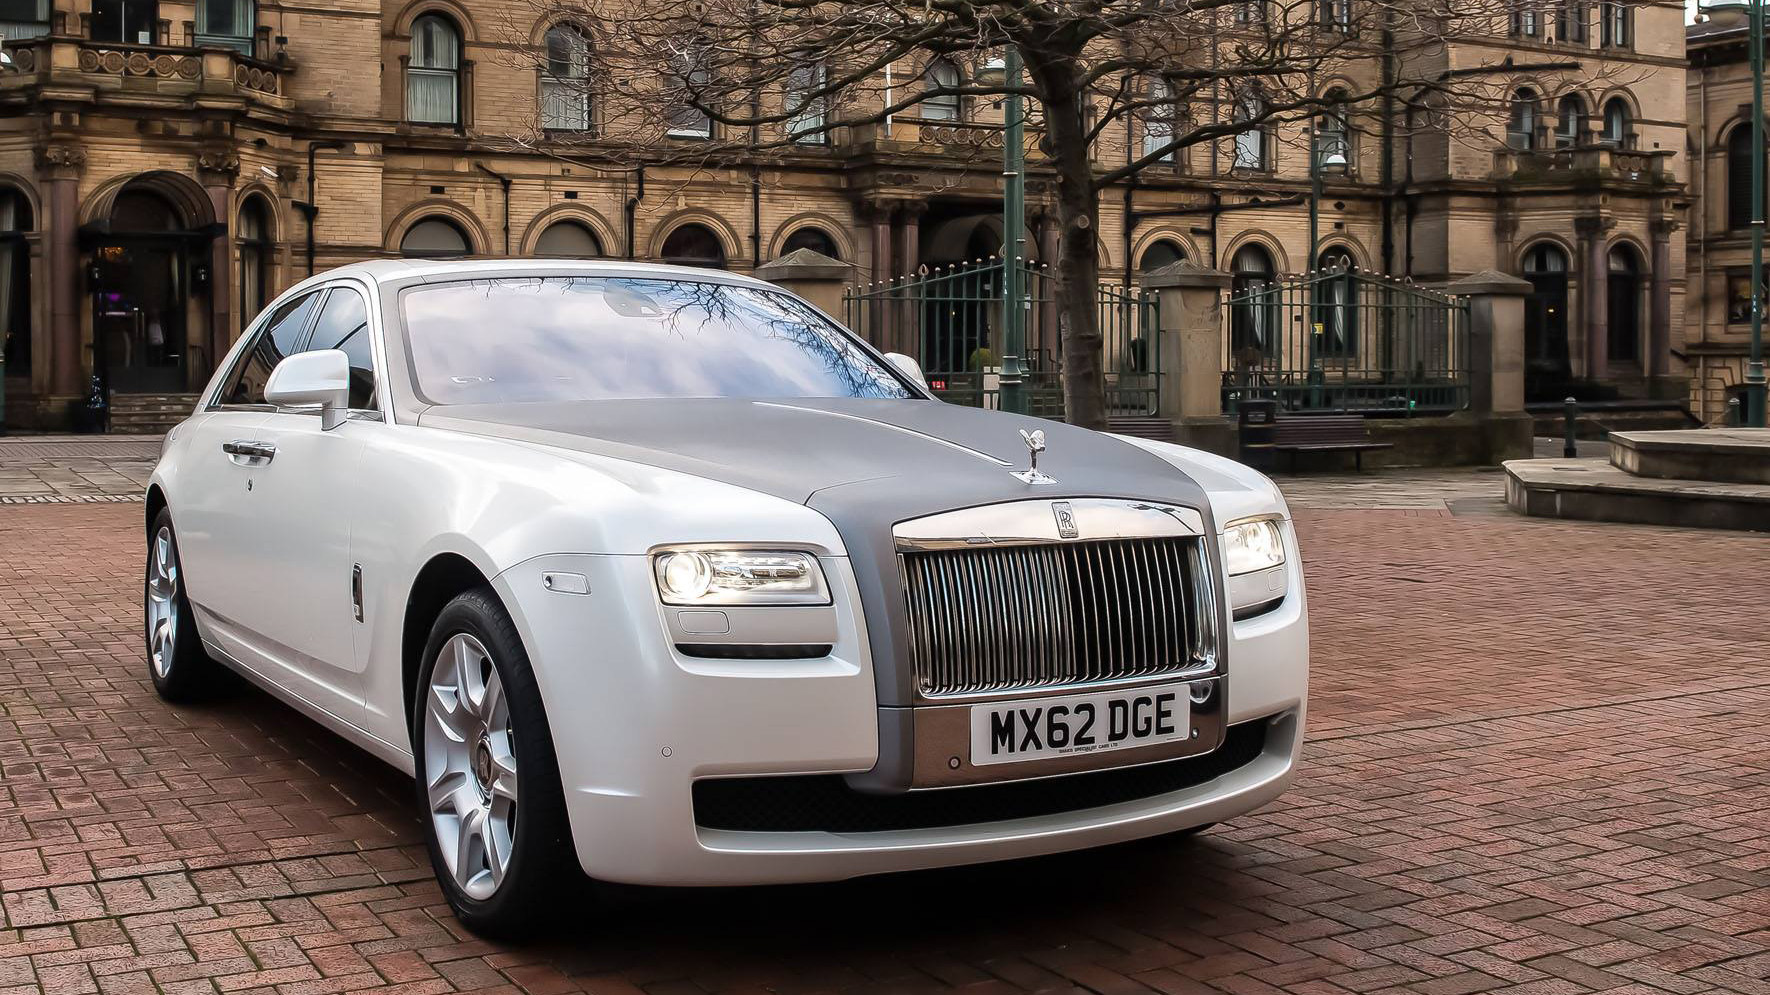 Rolls-Royce Ghost in white with Silver Bonnet, headlights are turned on and spirit of ecstasy is showing.